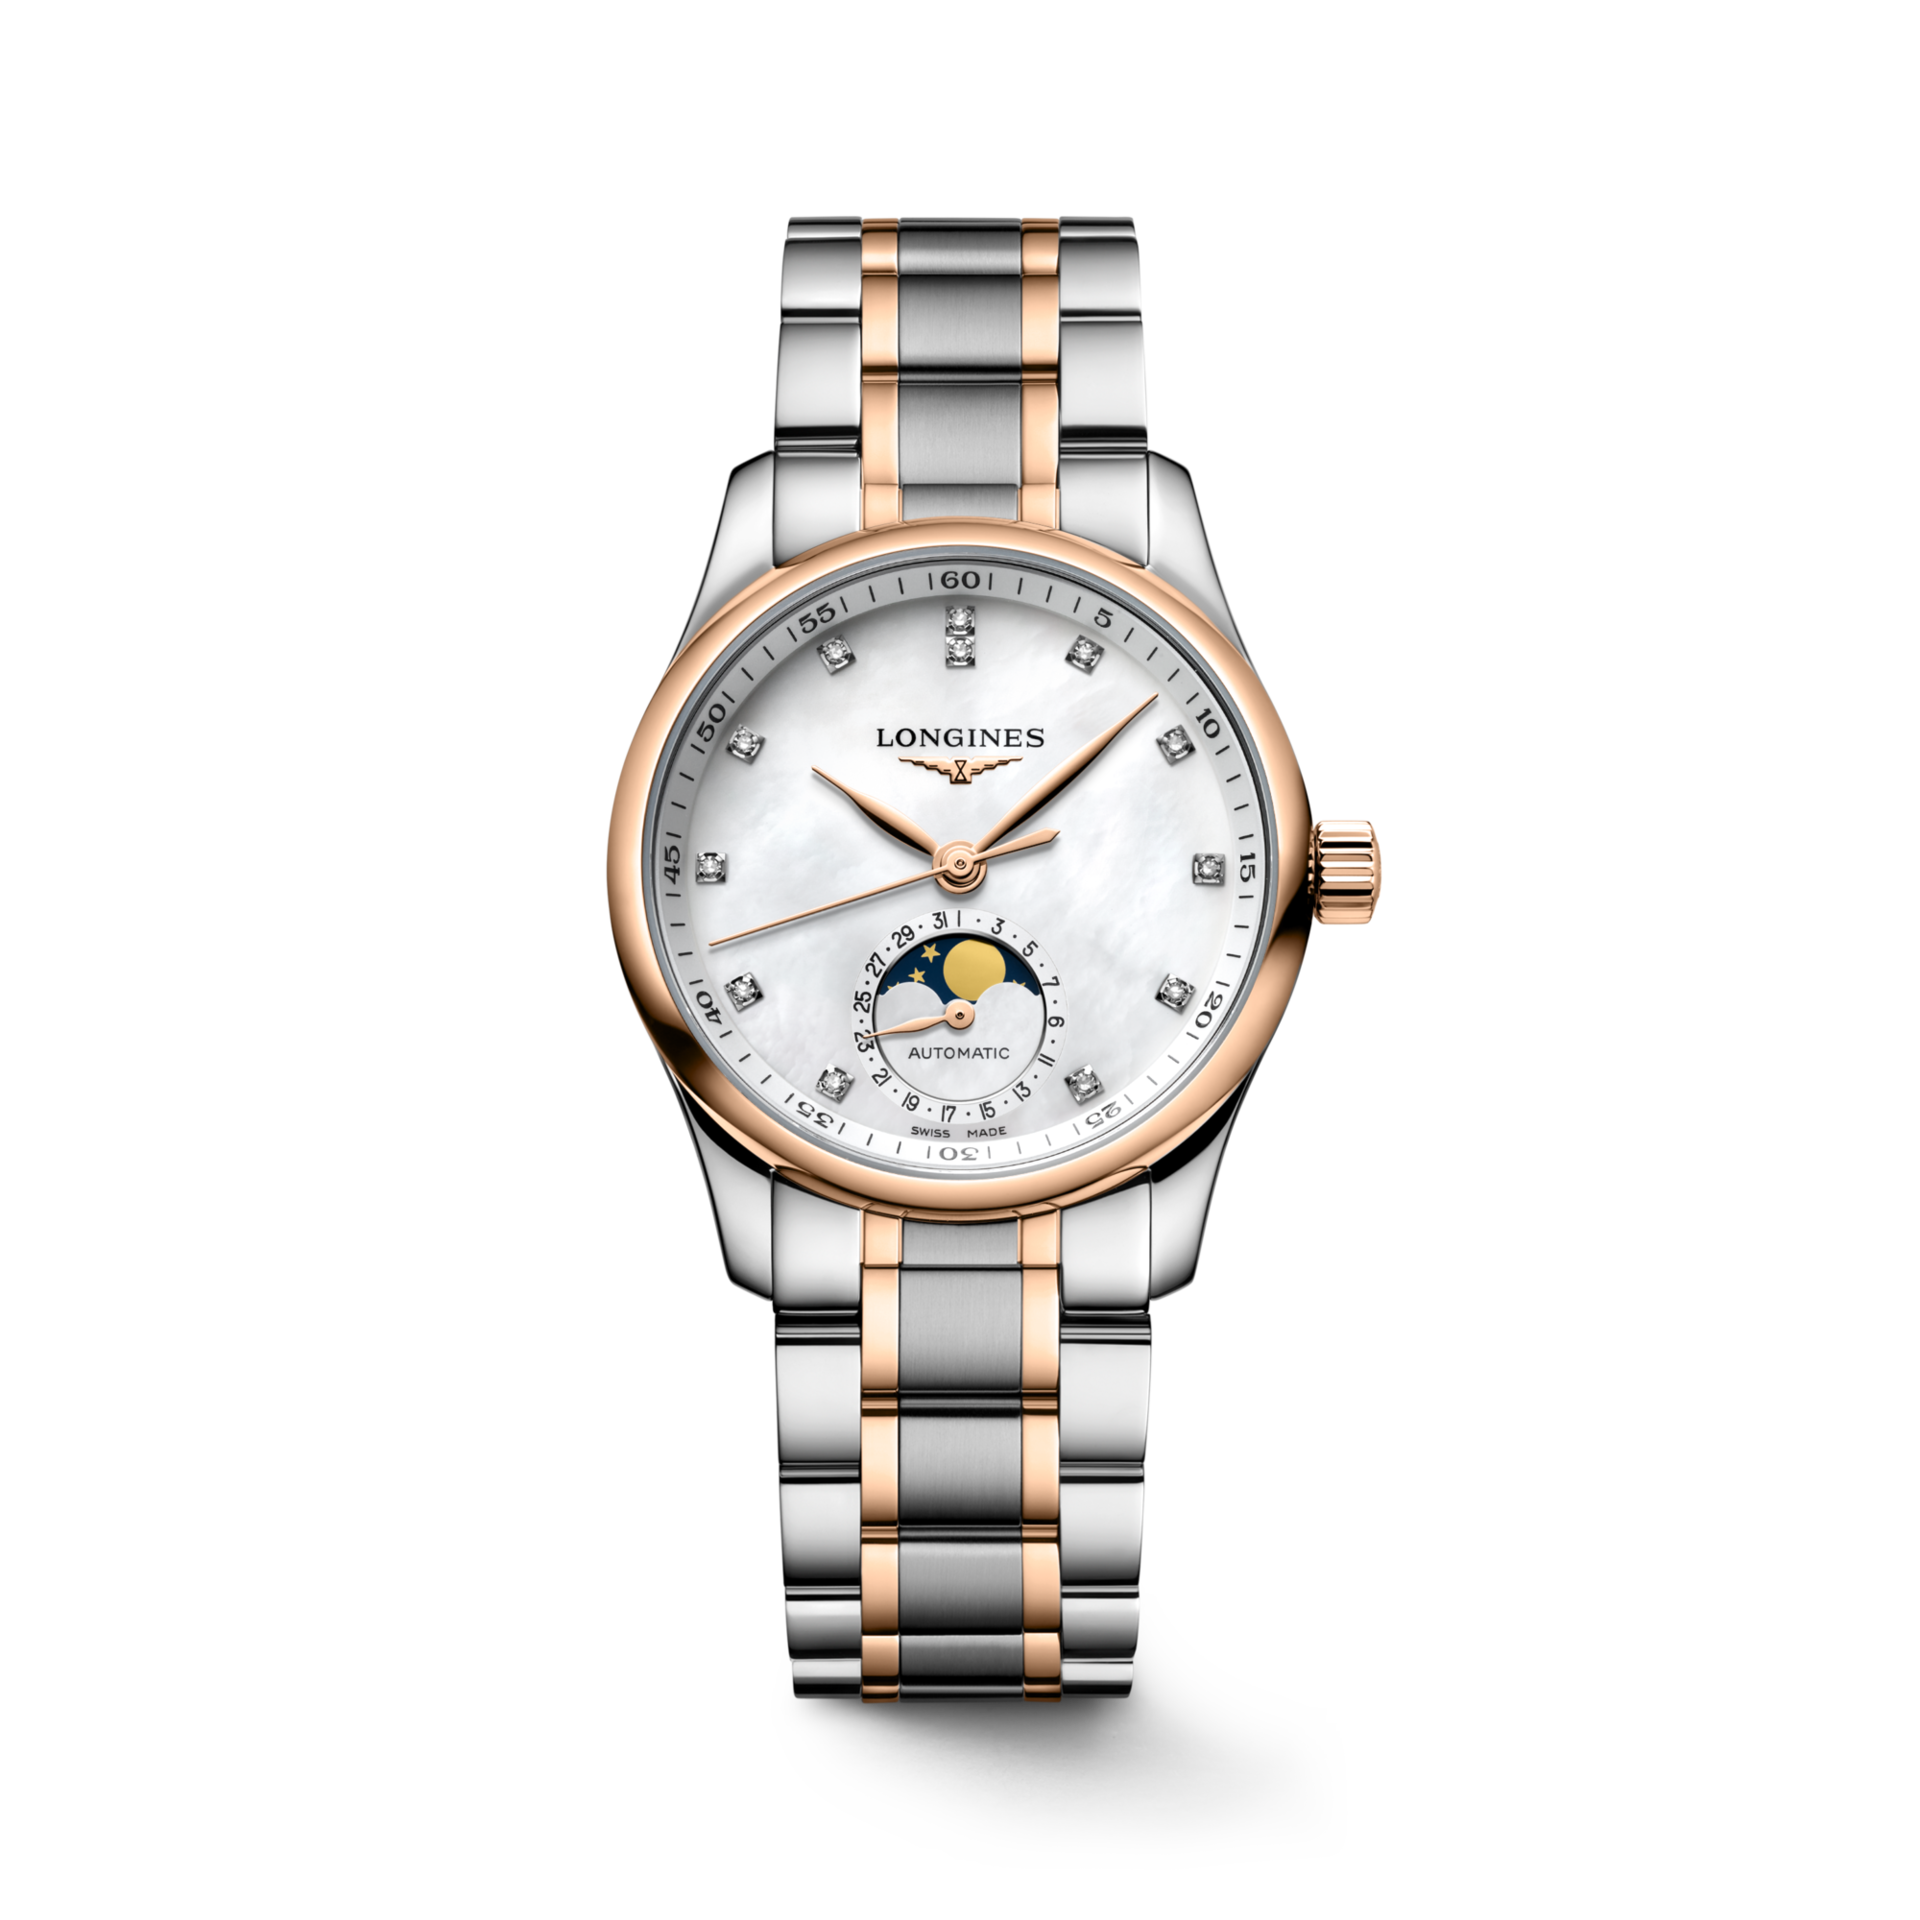 THE LONGINES MASTER COLLECTIONL2.409.5.89.7 L2.409.5.89.7